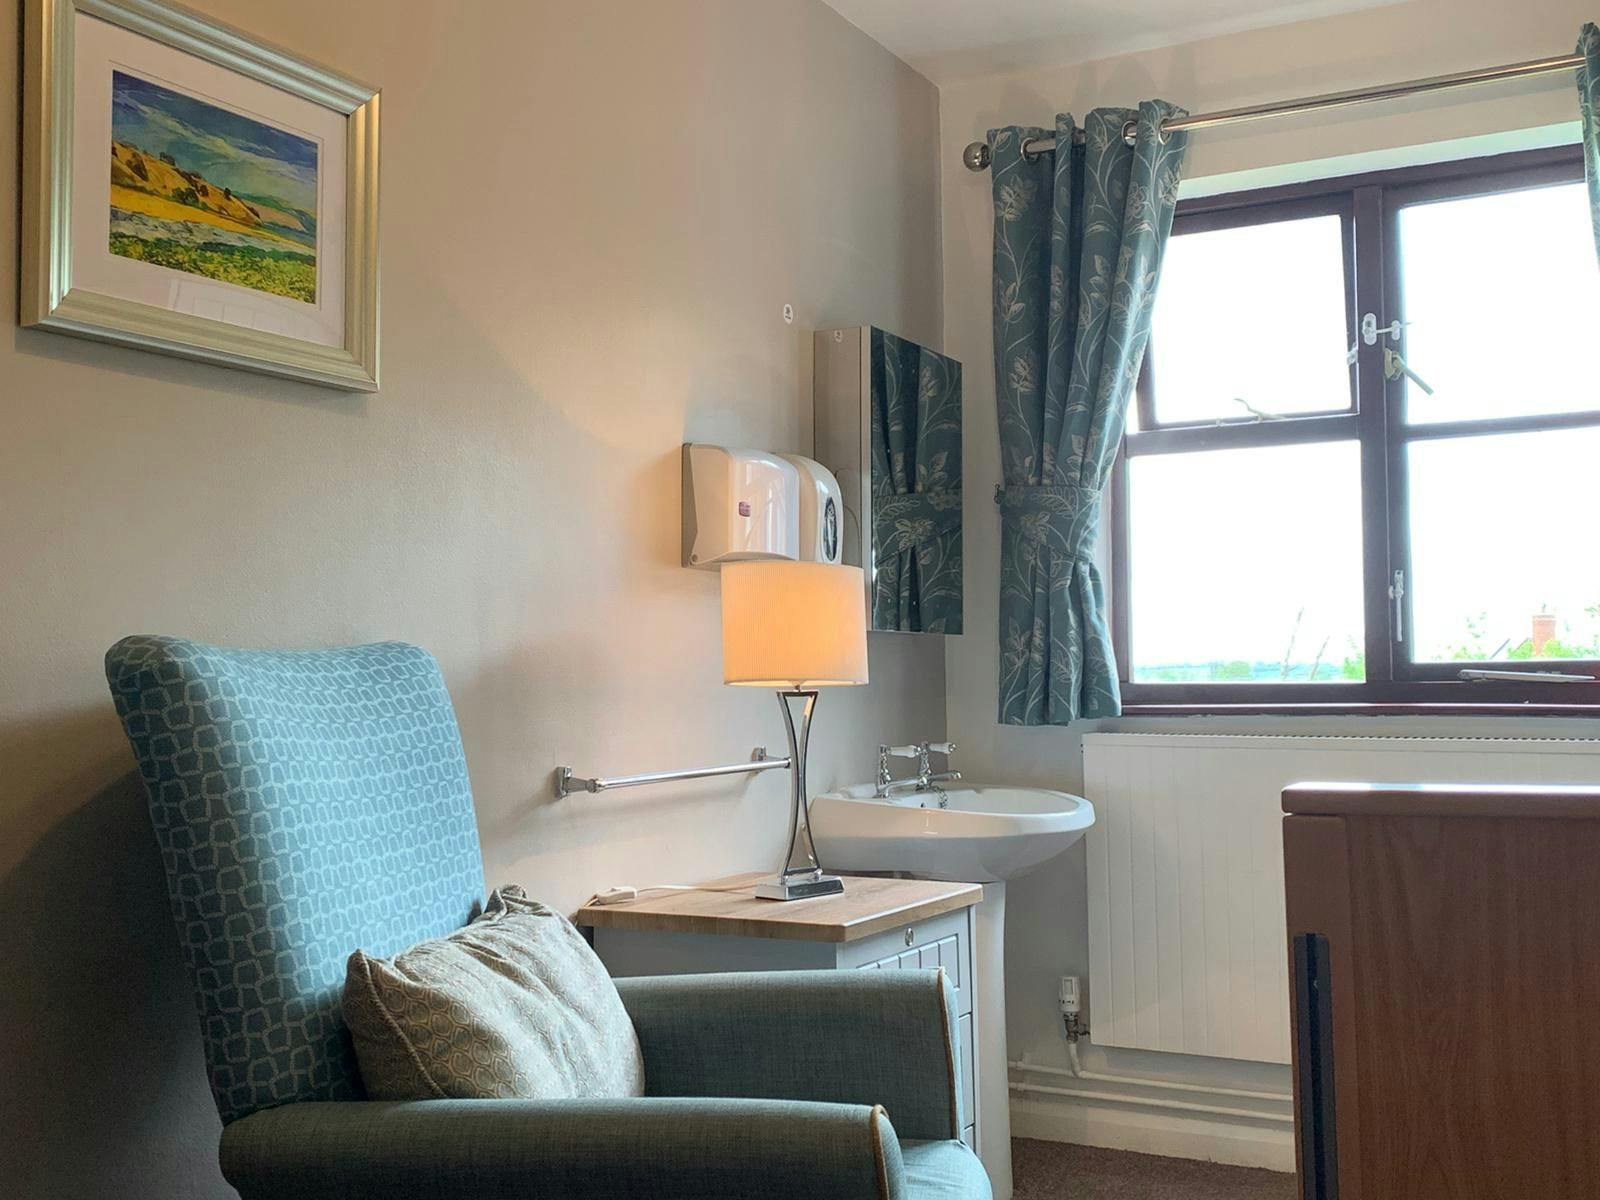 Bedroom area of Park House care home in Bewdley, West Midlands